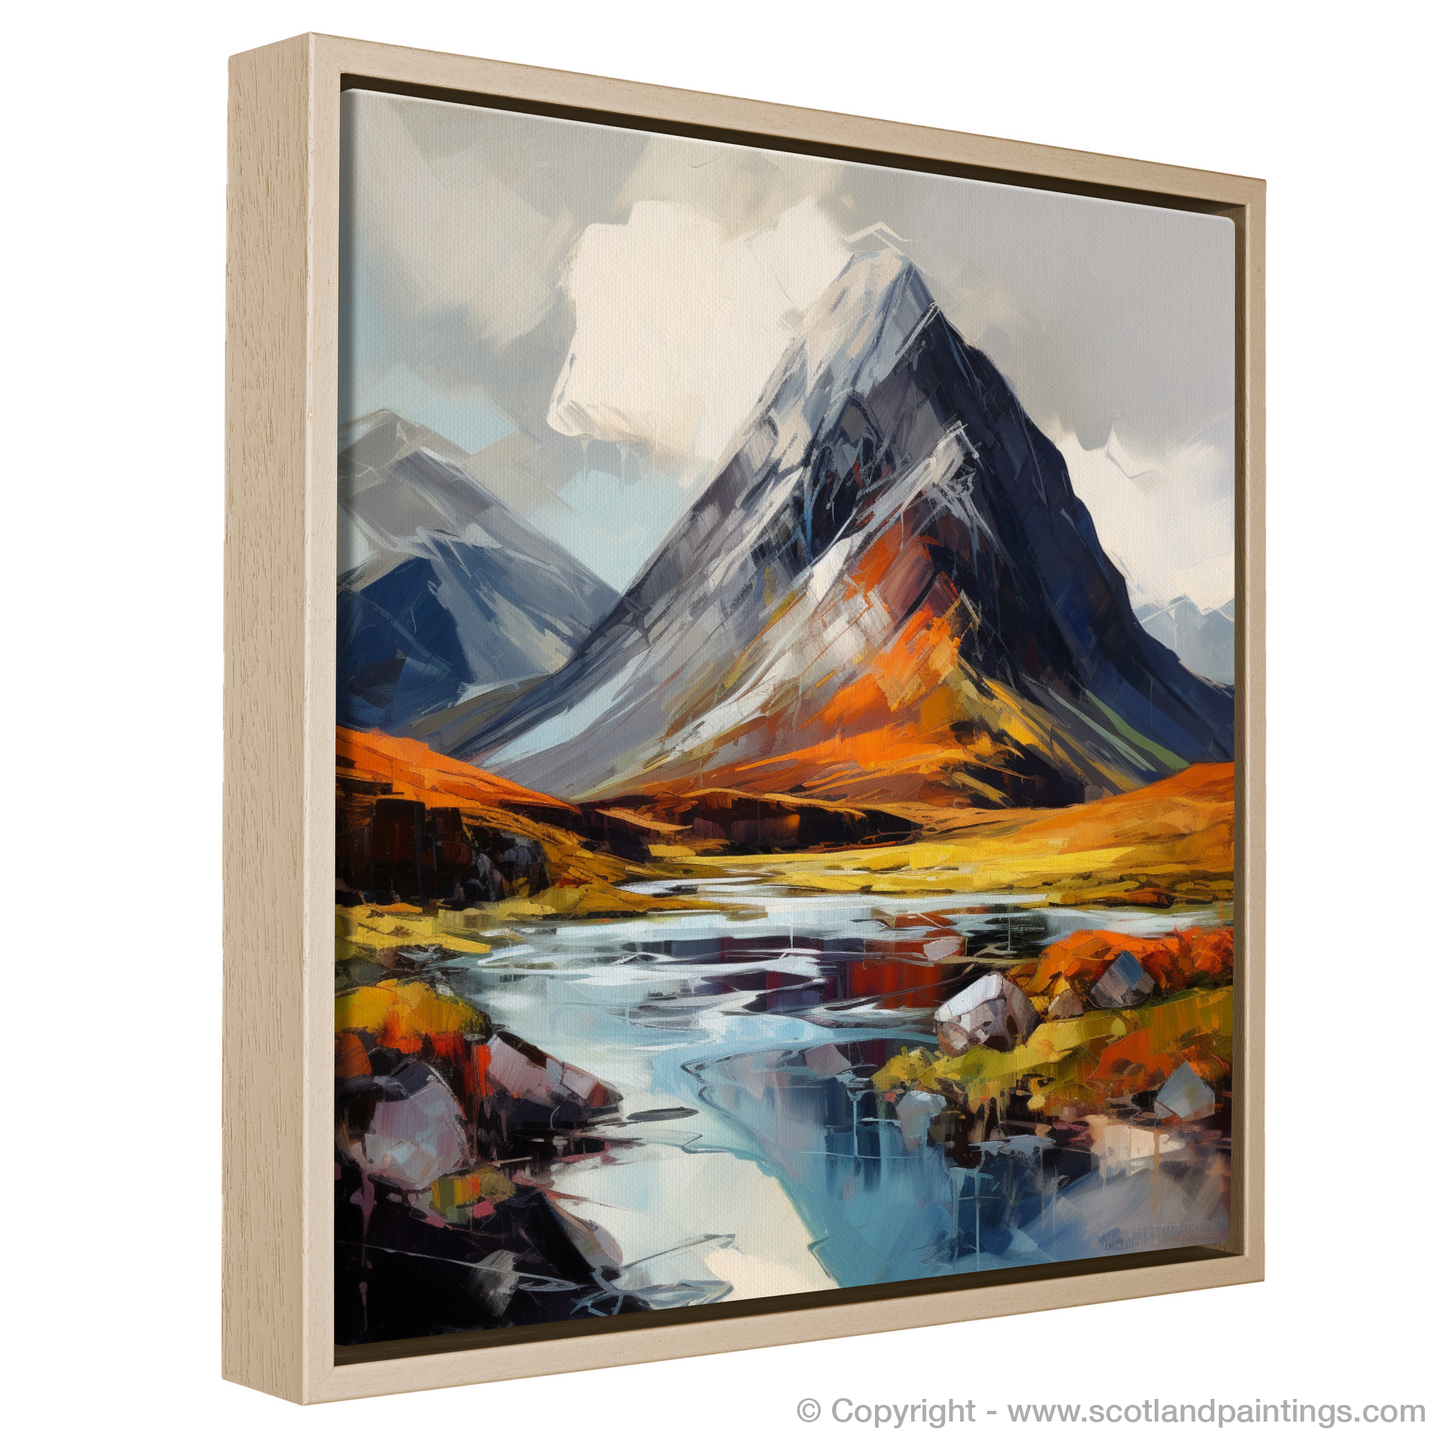 Painting and Art Print of Stob Coire Raineach (Buachaille Etive Beag) entitled "Highland Majesty: An Expressionist Ode to Stob Coire Raineach".